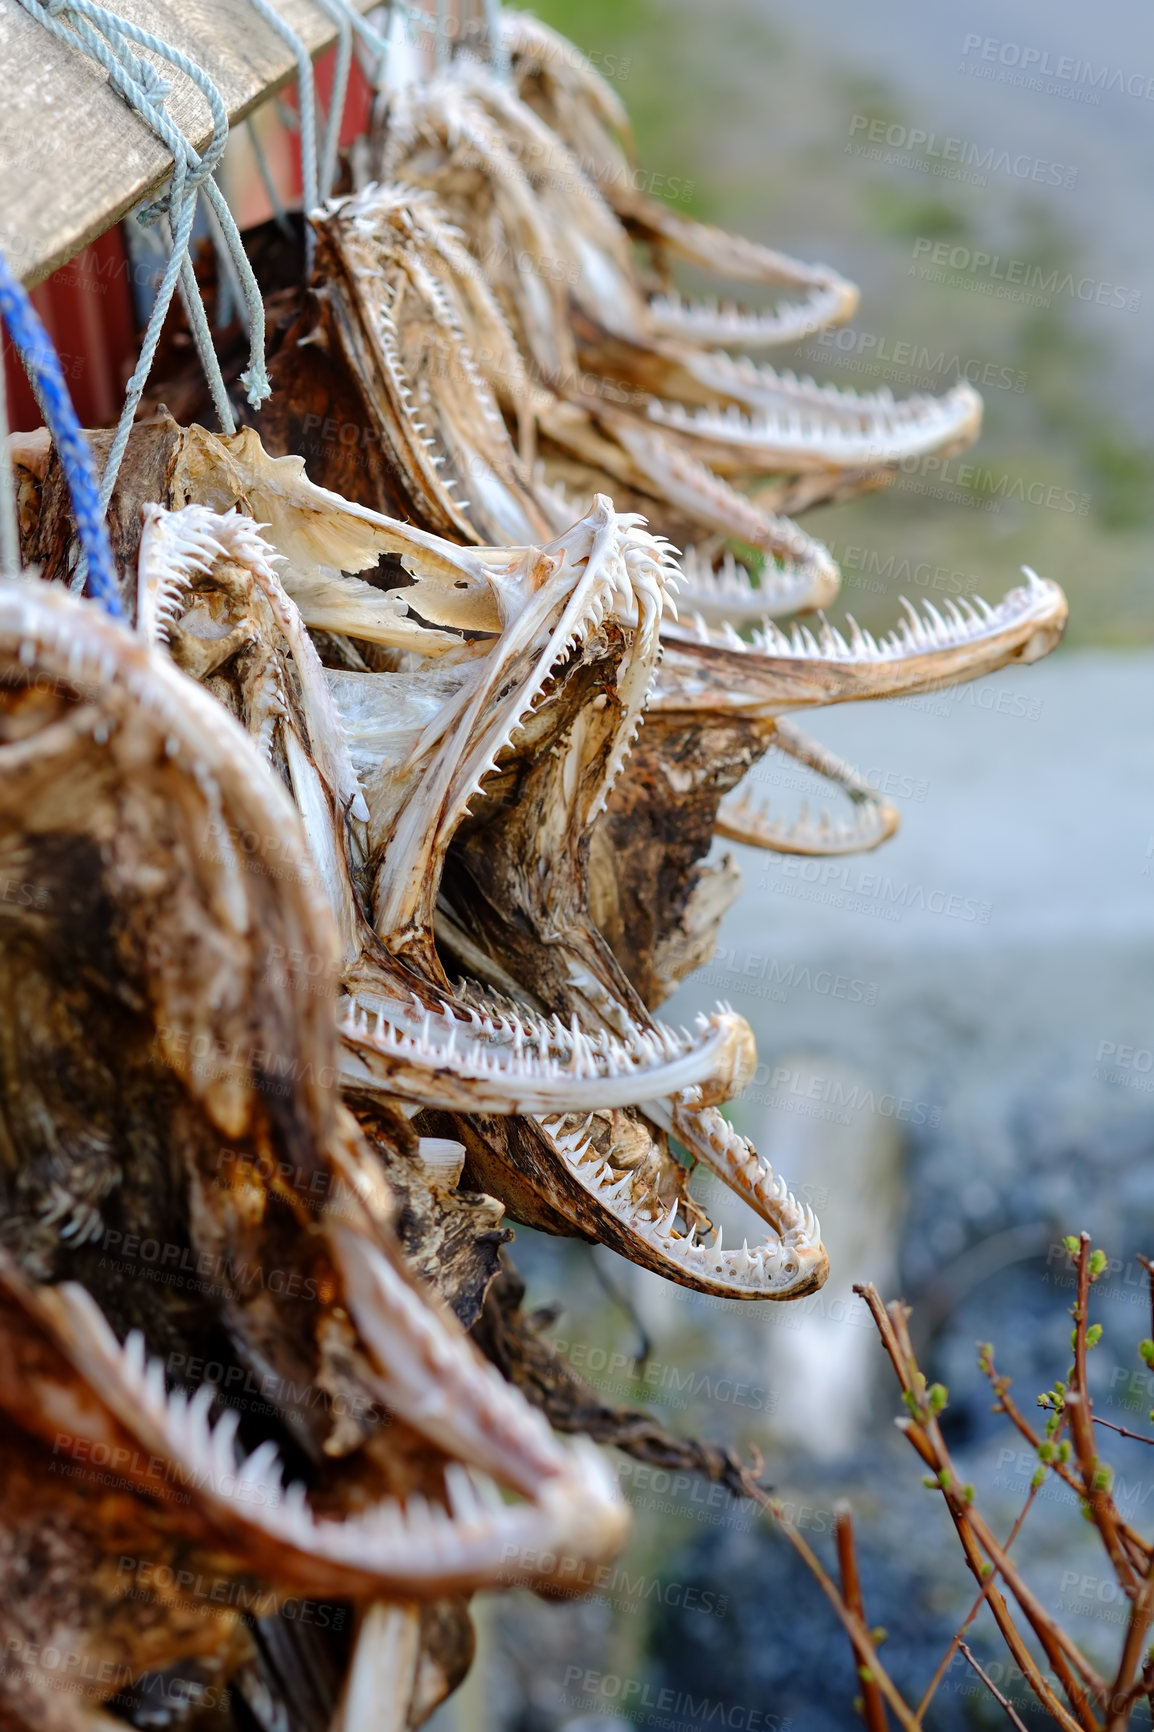 Buy stock photo Air dried fish. Traditional way of drying fish in Norway, Drying in the sun hanging on wooden racks.  Closeup of dehydrated cod which has been preserved by drying after salting, creepy looking jaws